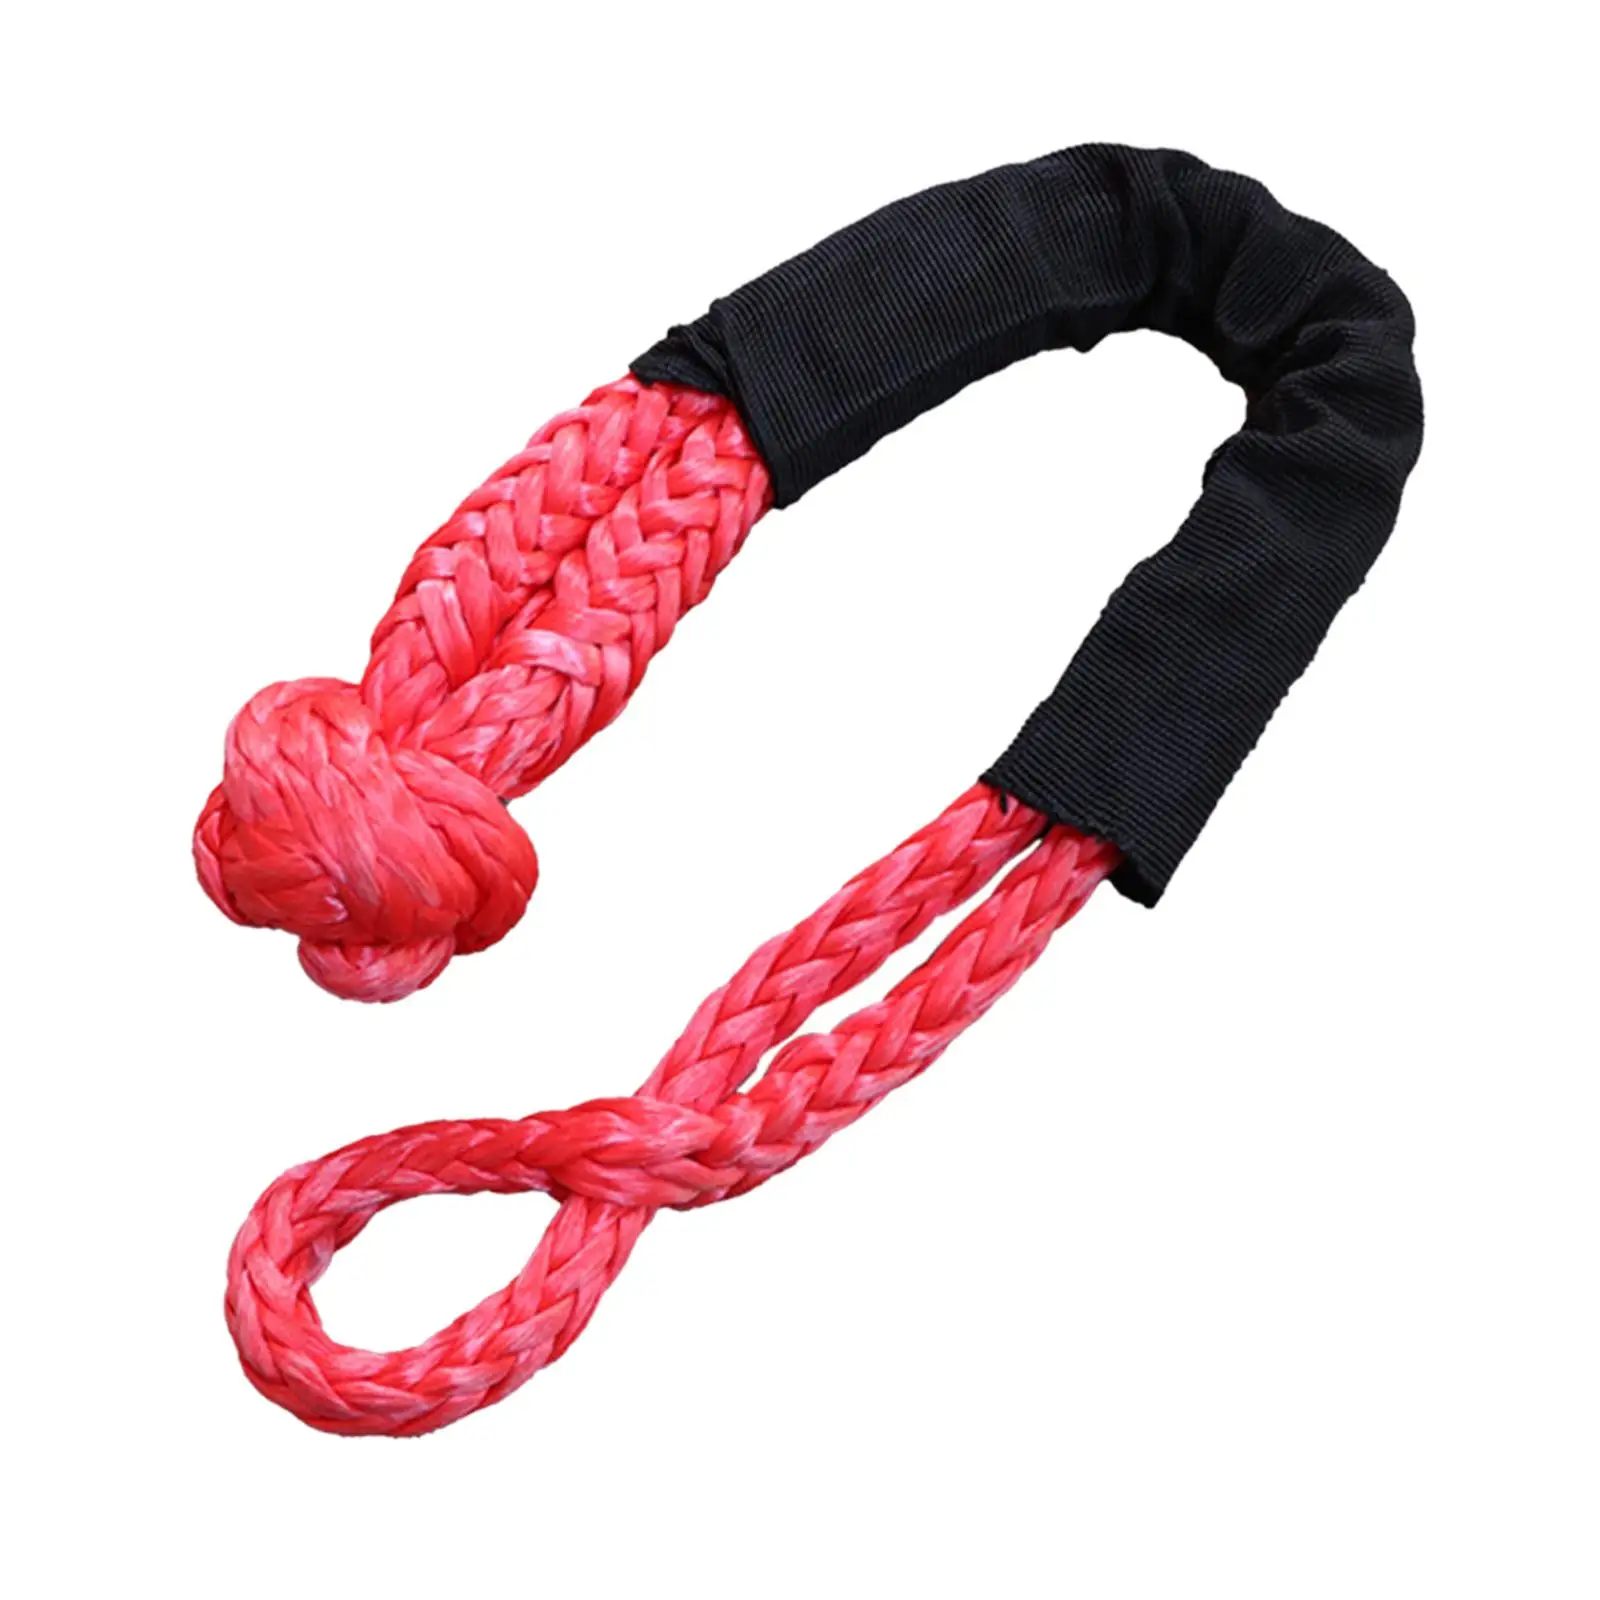 Soft Shackle Strong Easy to Use Oxford Cloth Fiber Versatile Tow Rope for Towing ATV UTV Vehicles Winches Trucks